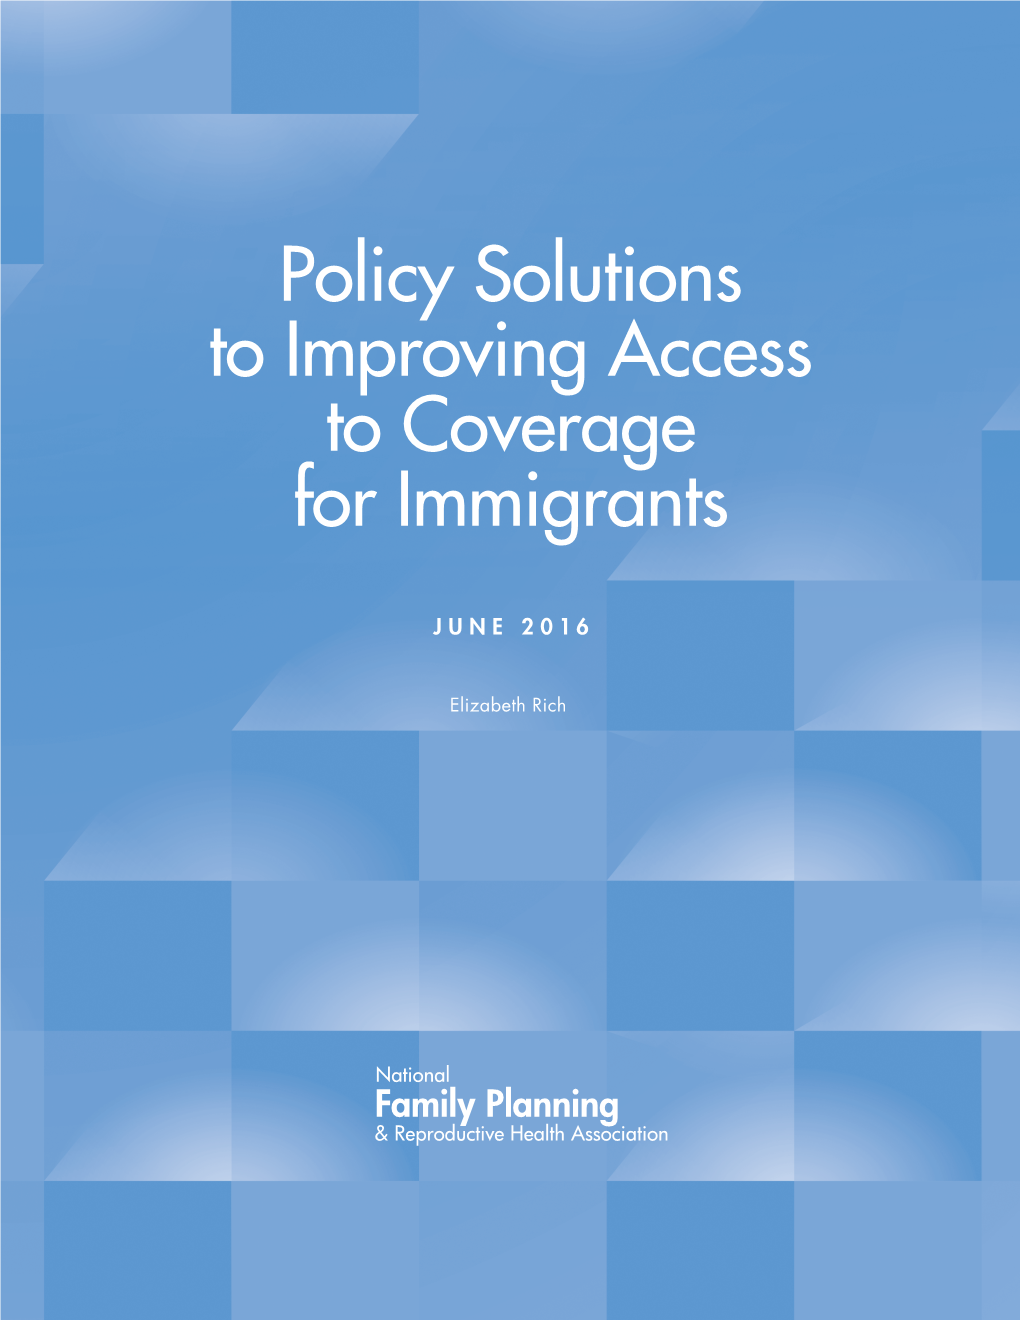 Policy Solutions to Improving Access to Coverage for Immigrants